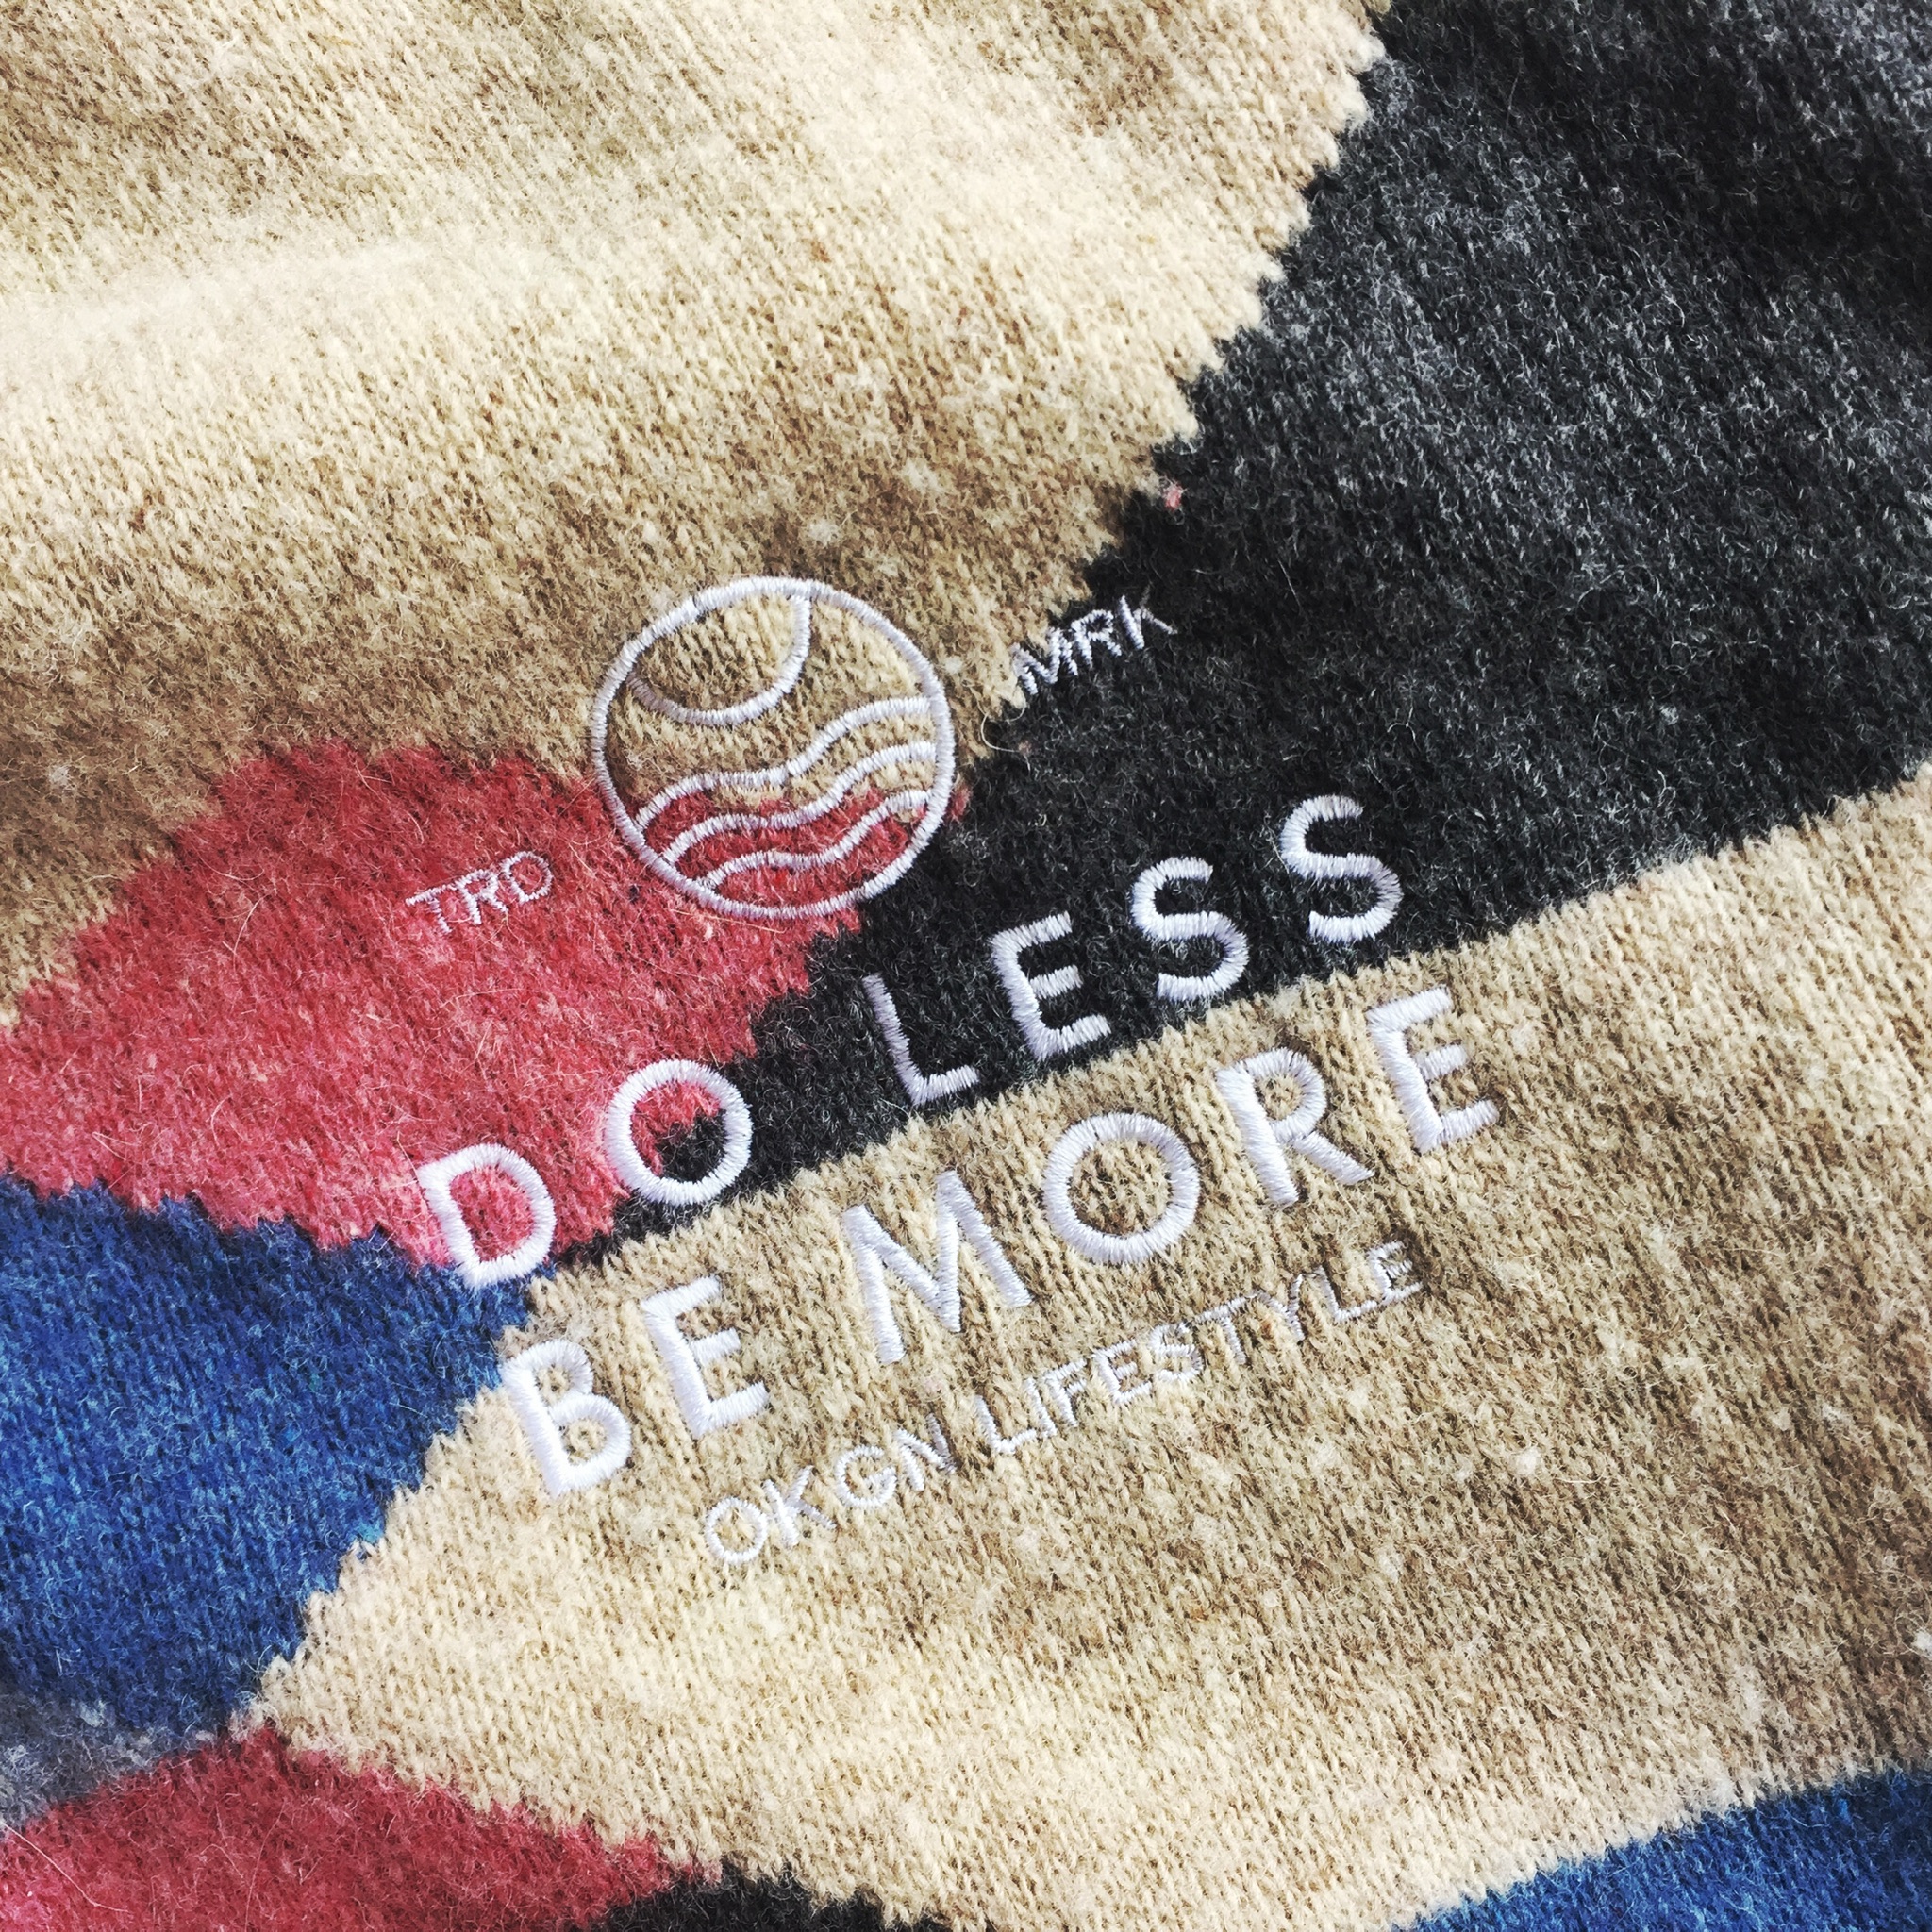 close up photo of "Do Less, Be More" slogan on Okanagan Lifestyle-branded thrifted wool sweater